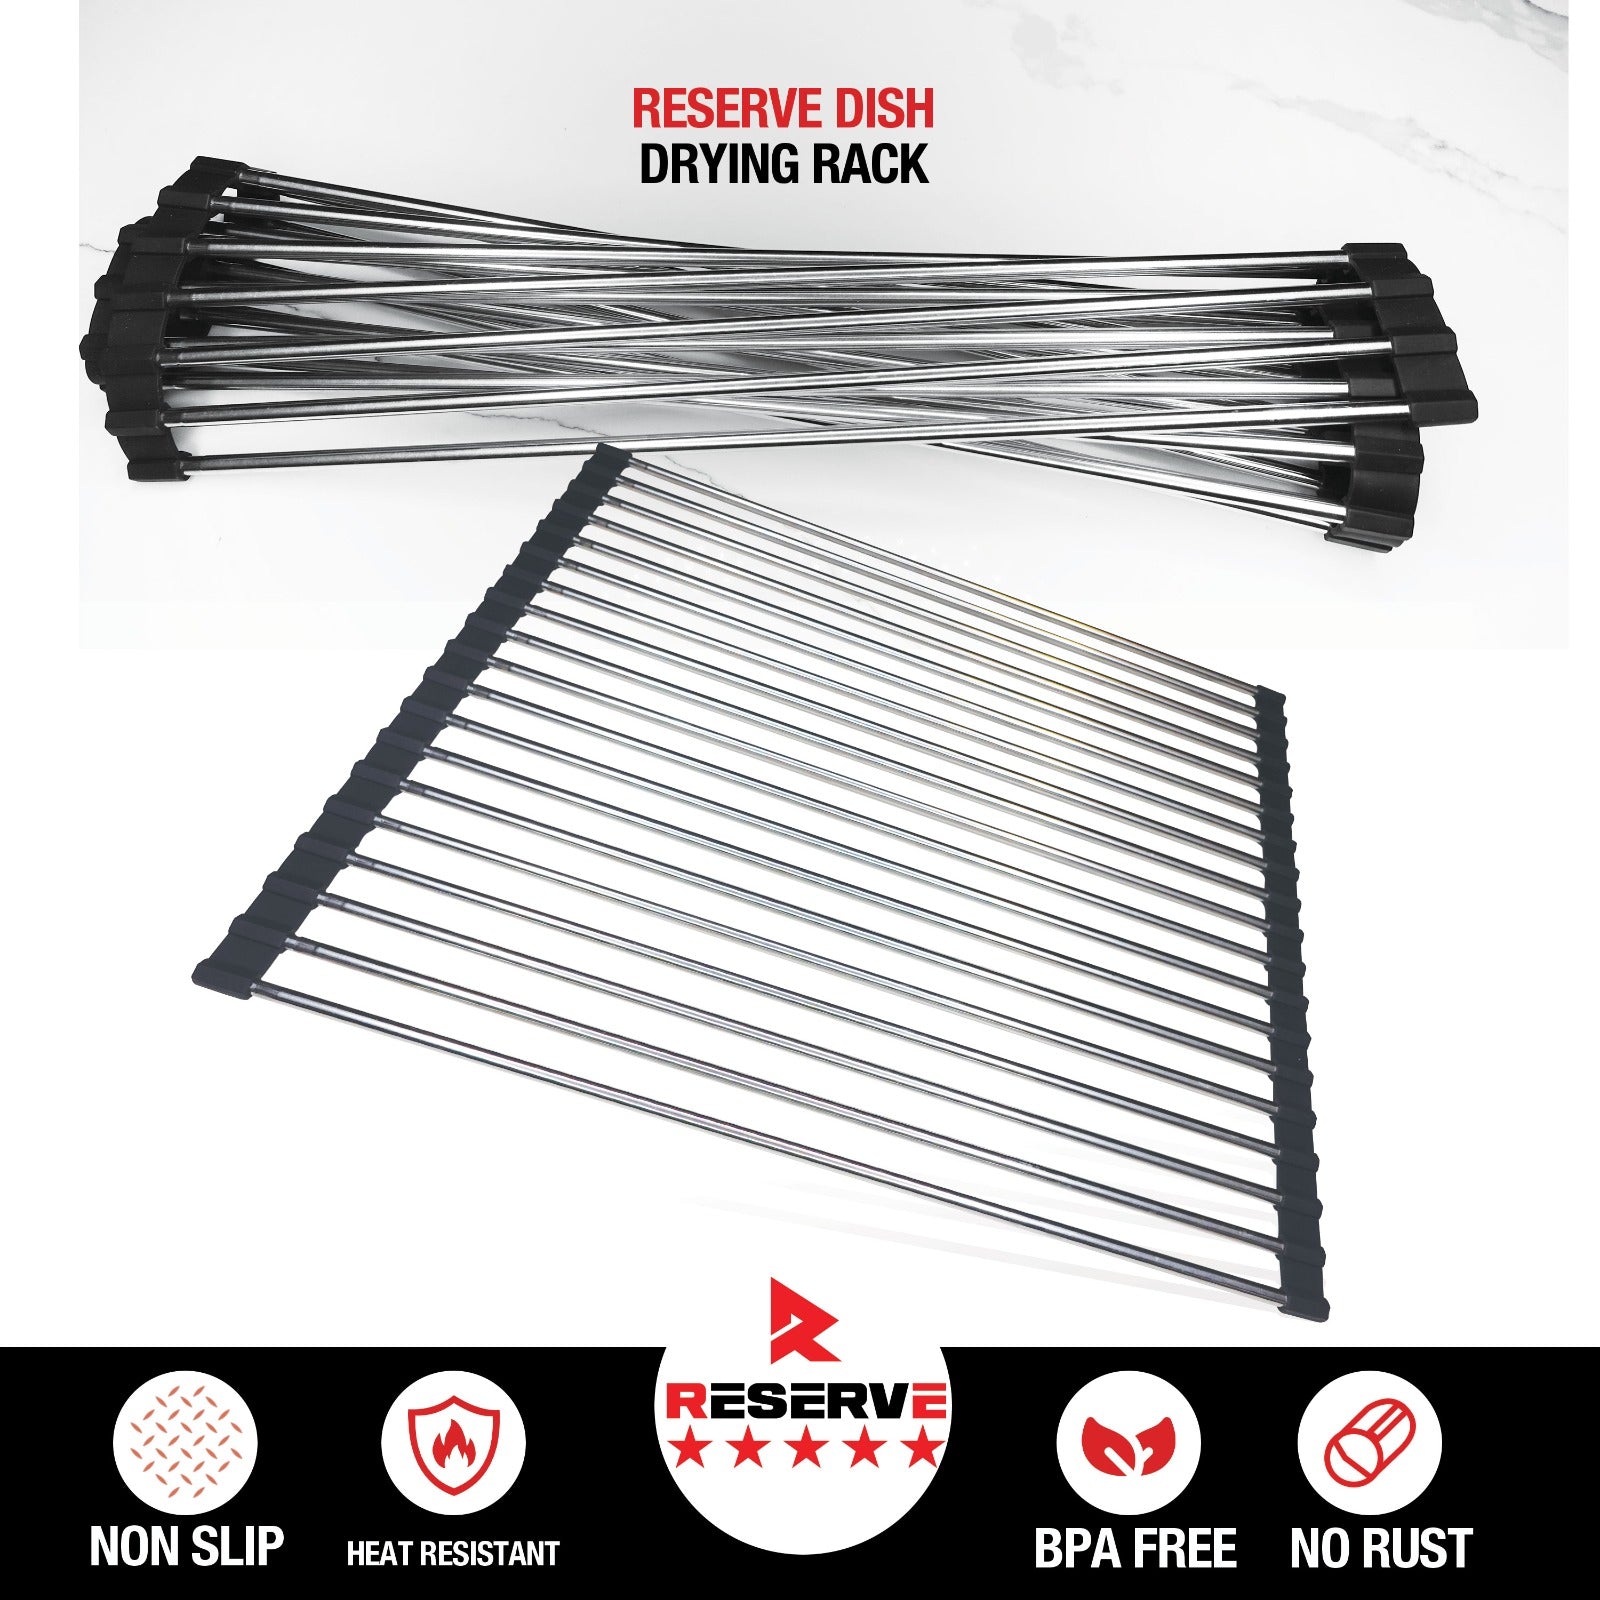 R RESERVE Upgraded, Roll up Dish Drying Over The Sink Rack Mat with Stainless Steel Wires, Rollable, Large, Black/Silver, (15.5" x 23")